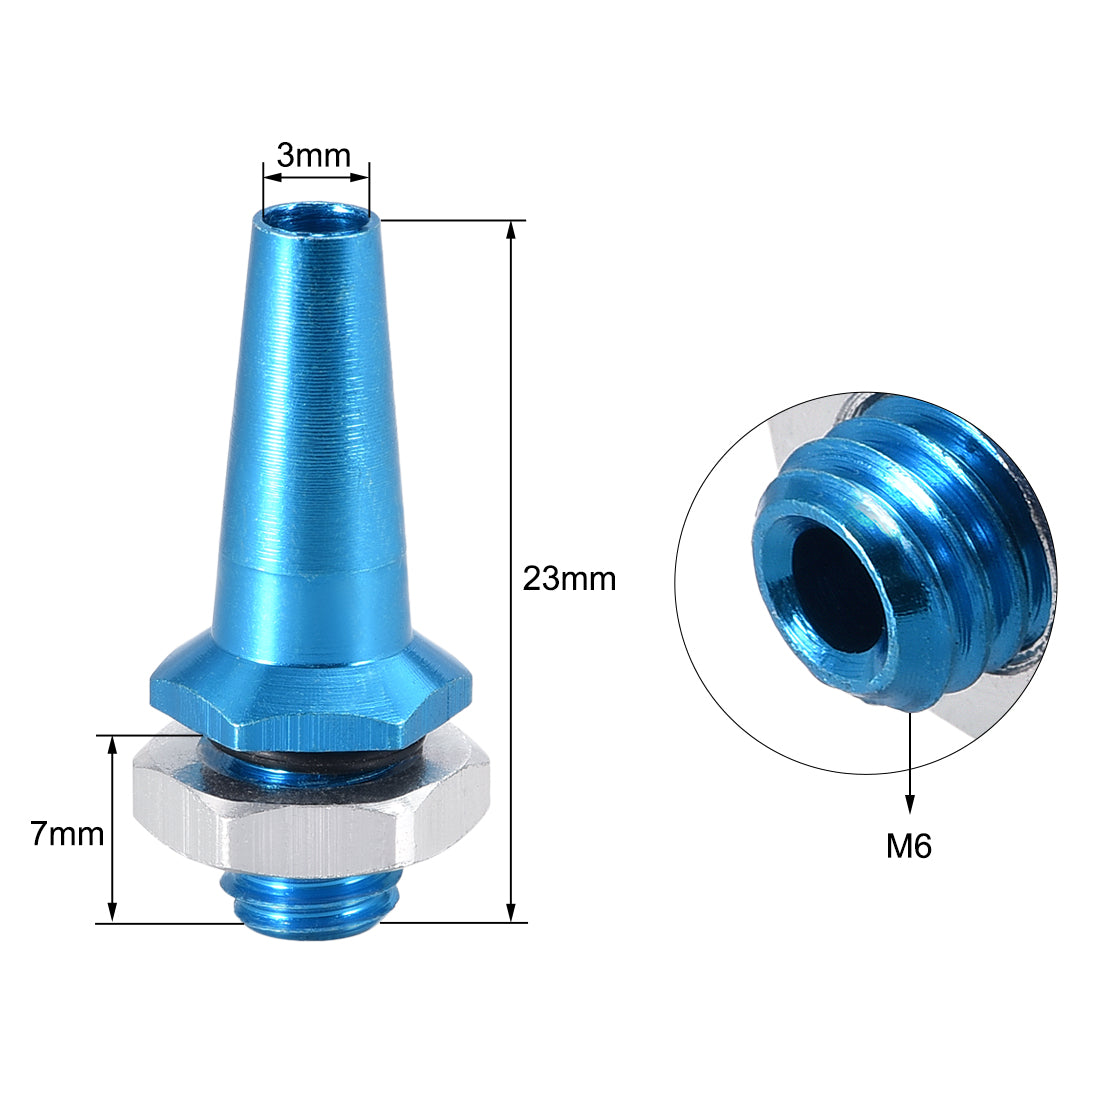 uxcell Uxcell RC Antenna Mount, M6 Thread, Aluminum Alloy, for RC Boat Blue 4pcs